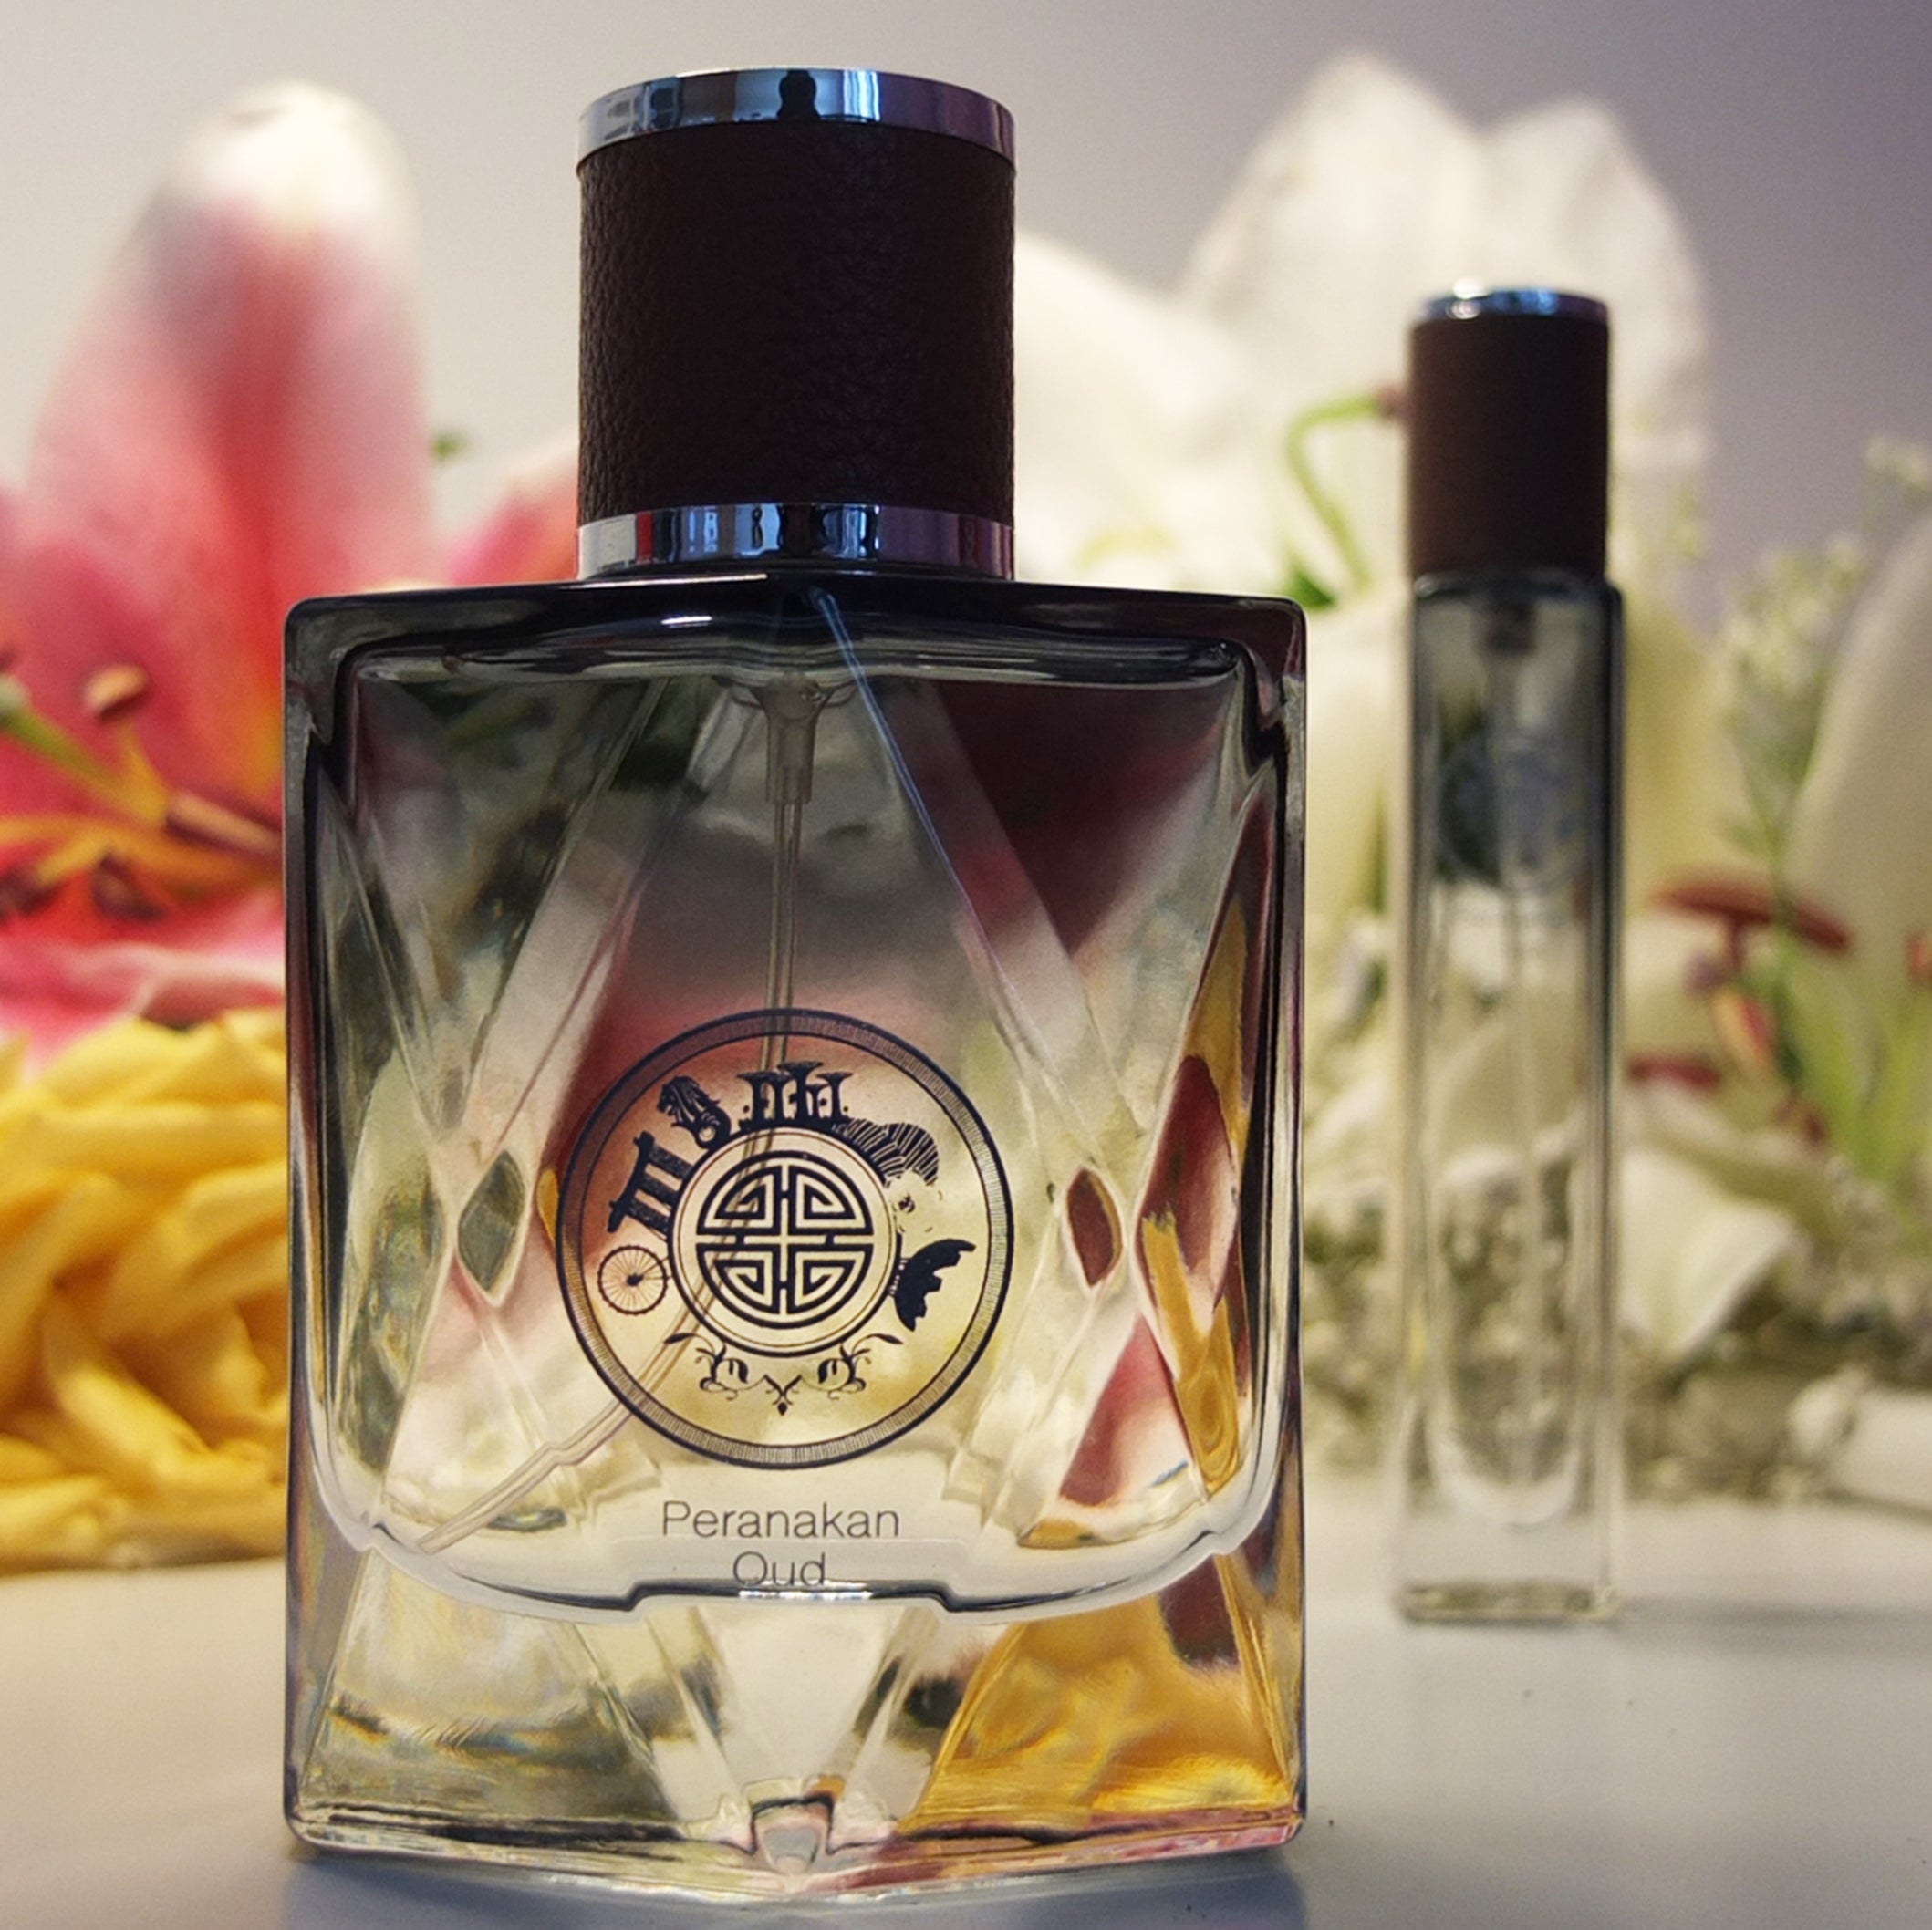 Online Perfume Collections Singapore : Singapore Memories brings Peranakan Oud, a perfect Orchids perfume for friends and family gifting